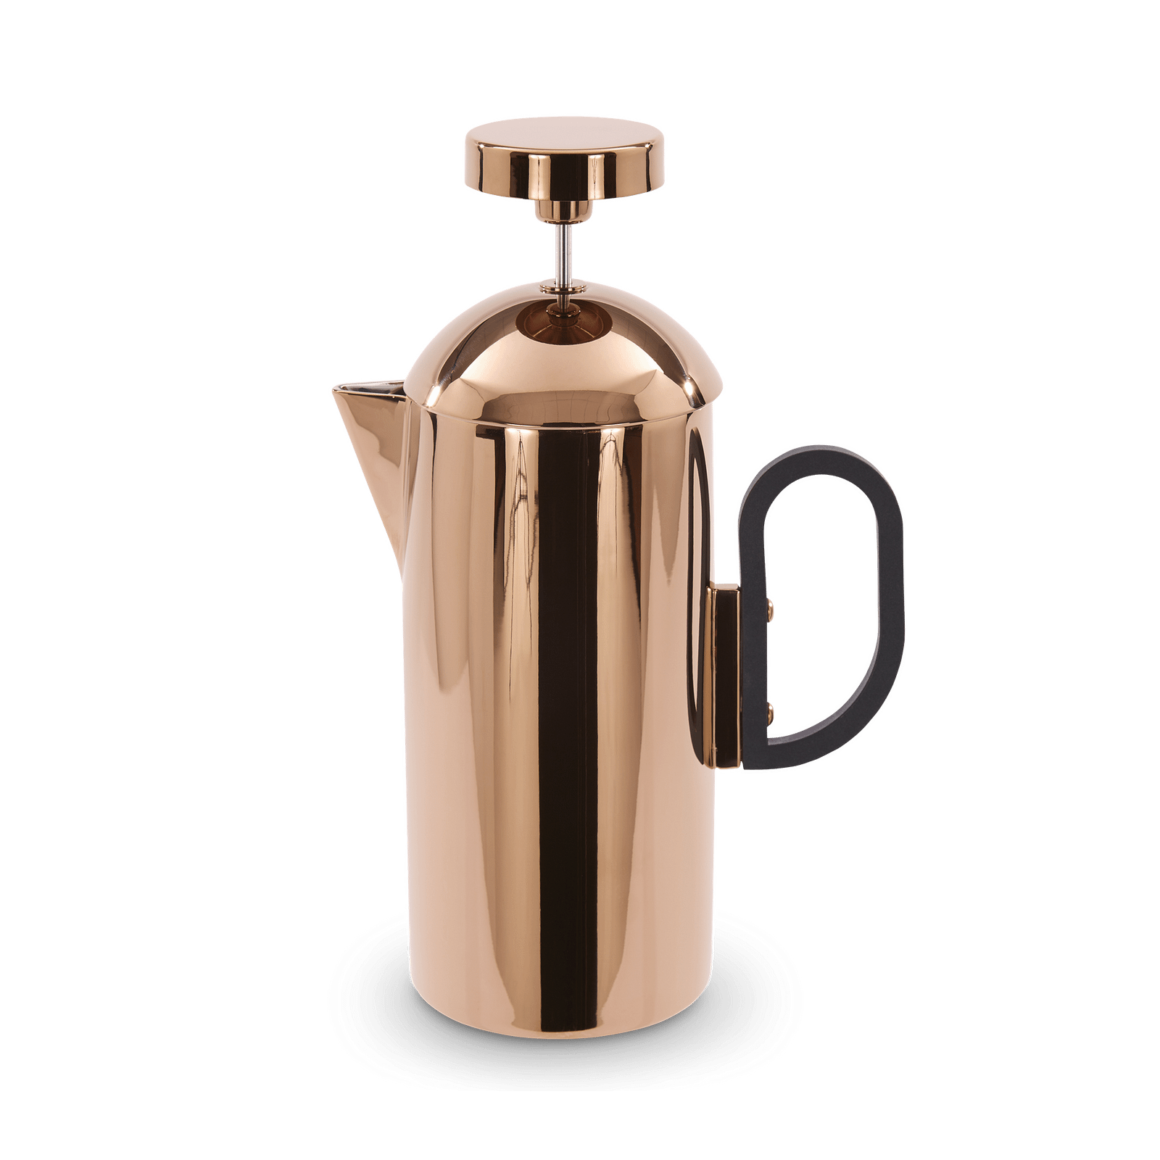 Most Aesthetically Pleasing Minimalist French Presses - Tom Dixon Brew Cafetiere